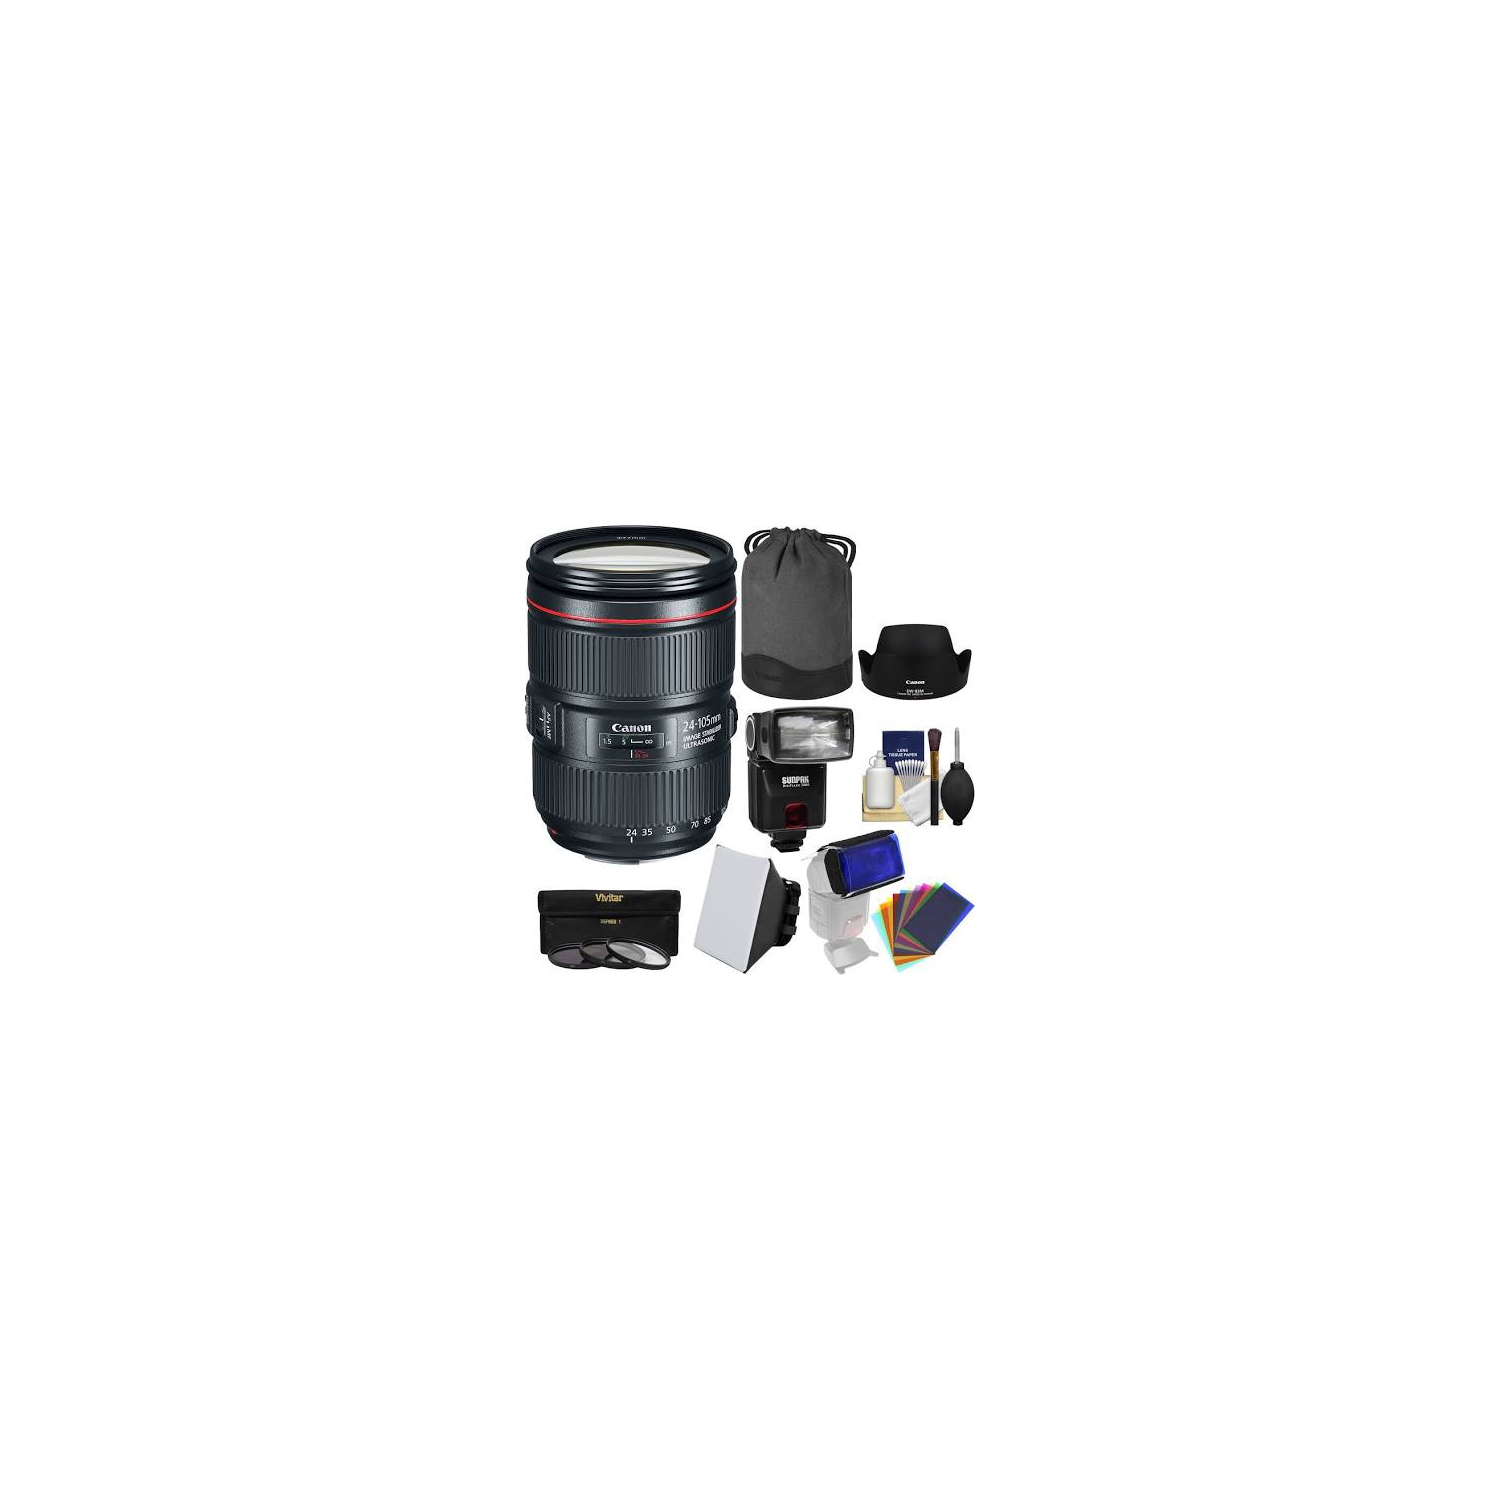 Canon EF 24-105mm f/4L Is II USM Zoom Lens with 3 UV/CPL/ND8 Filters + Flash + Gel Diffusers + Soft Box + Kit - US Version w/ Seller Warranty